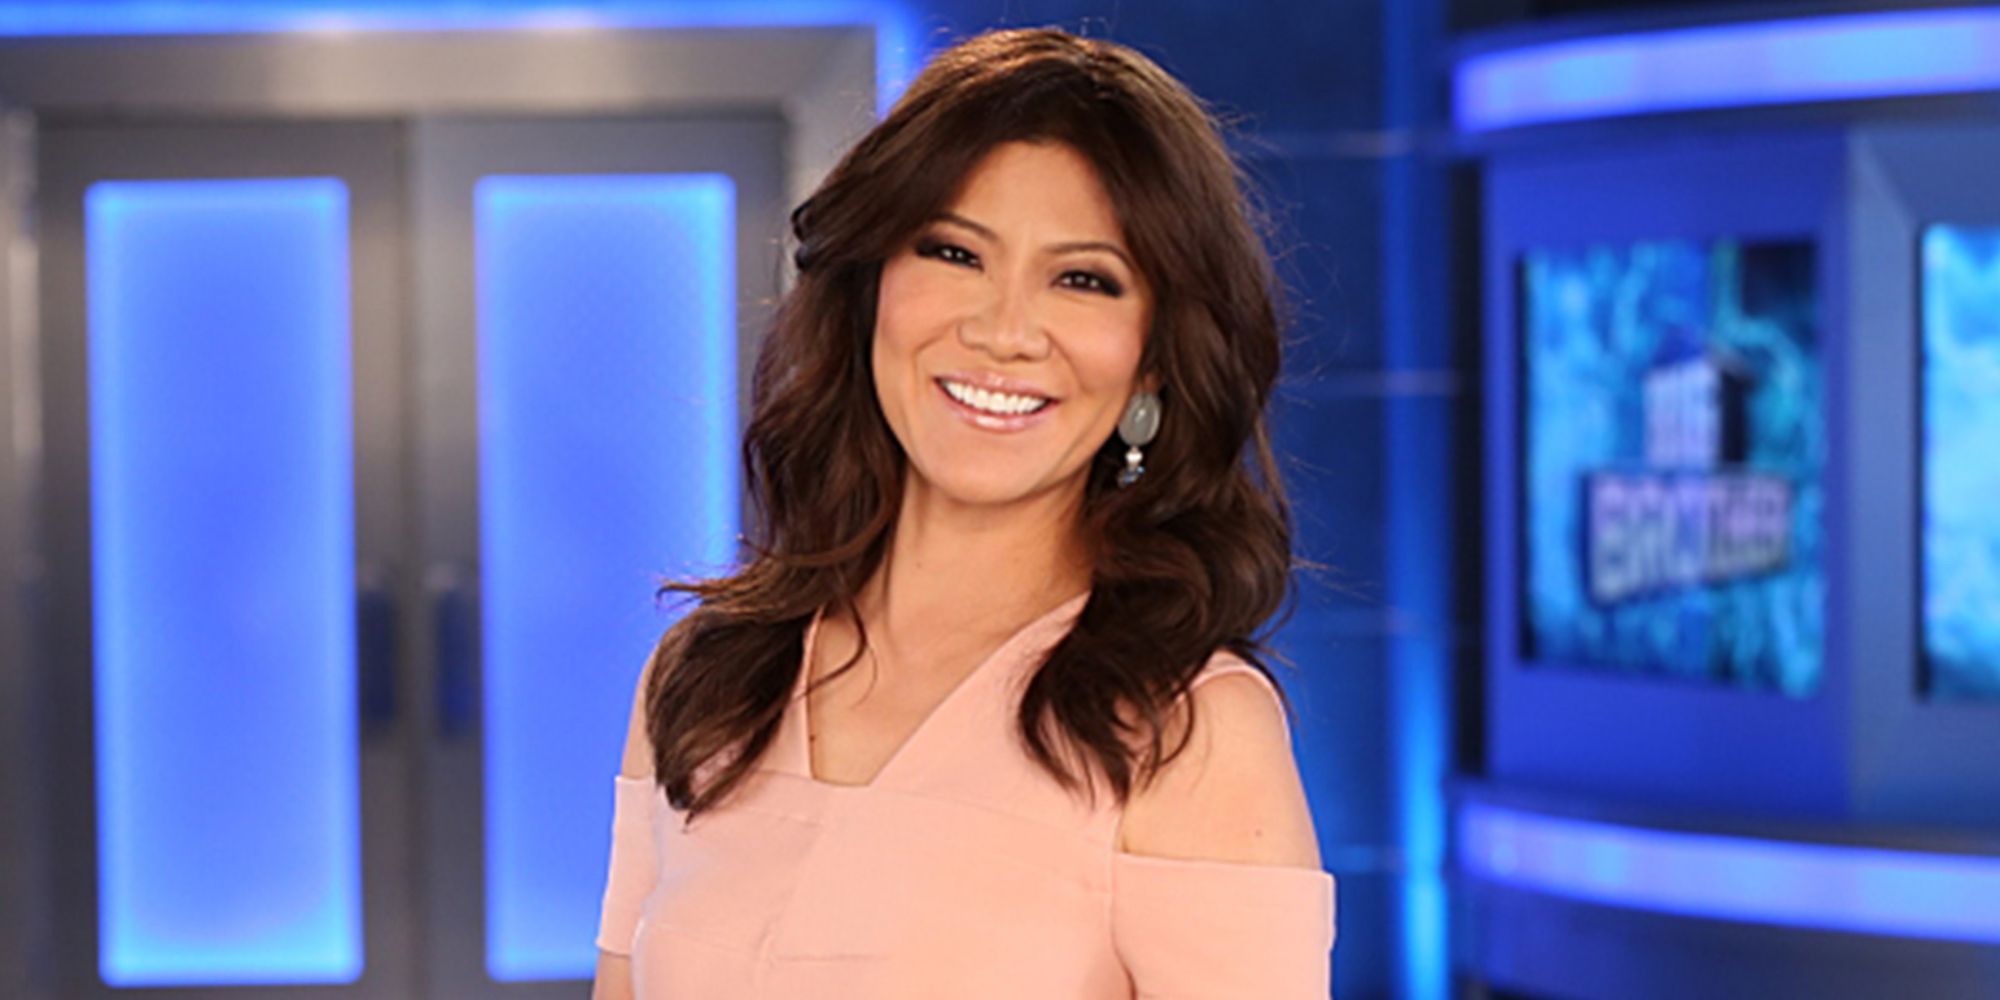 Big Brother Julie Chen Teases Bb With Go Big Or Go Home Tagline